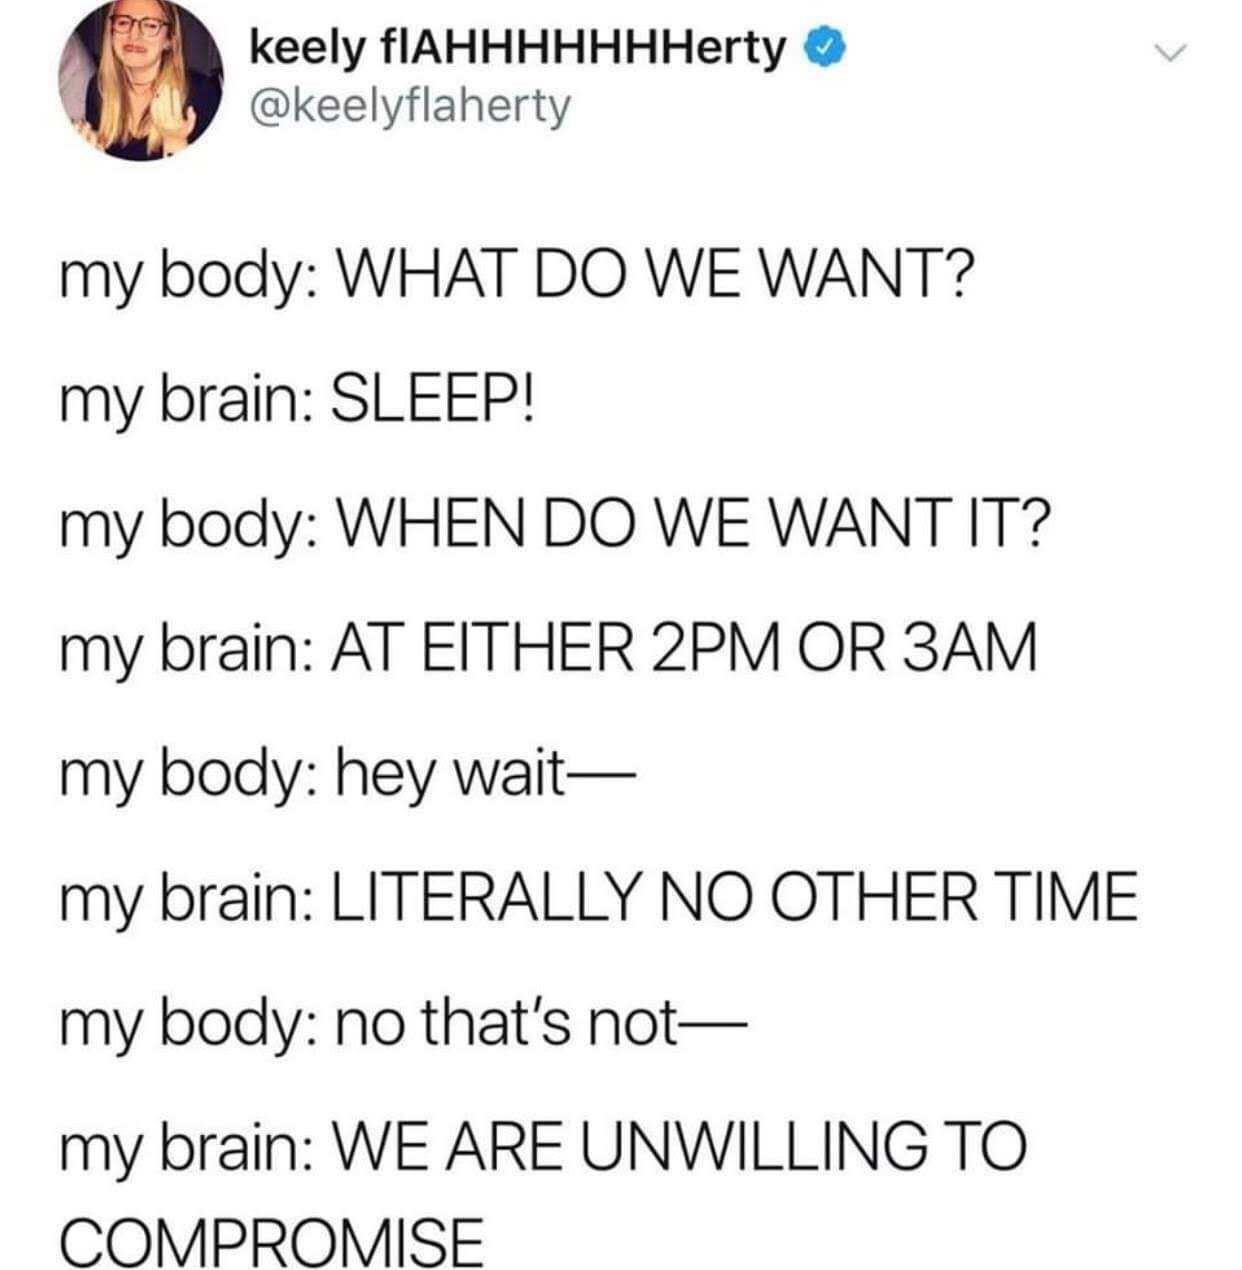 do we want sleep meme - keely FIAHHHHHHHerty my body What Do We Want? my brain Sleep! my body When Do We Want It? my brain At Either 2PM Or 3AM my body hey wait my brain Literally No Other Time my body no that's not my brain We Are Unwilling To Compromise